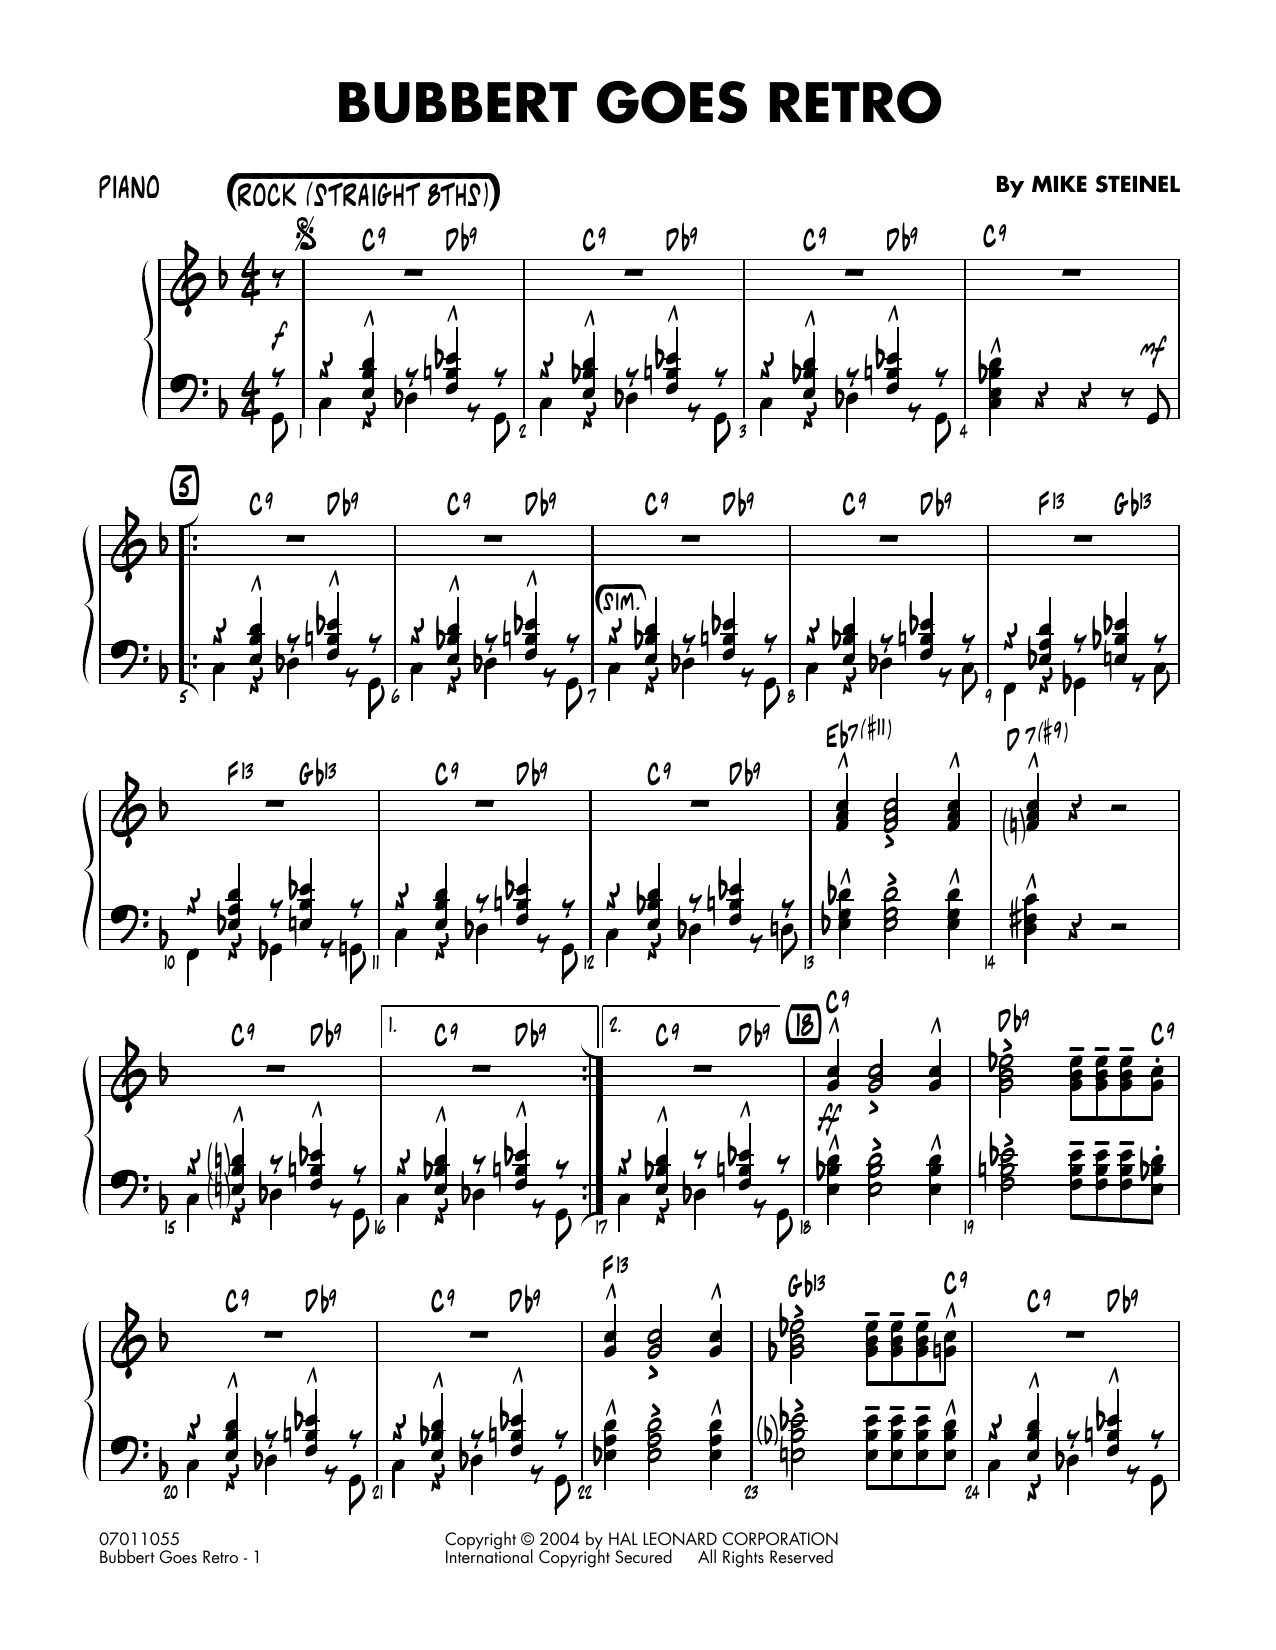 Mike Steinel Bubbert Goes Retro - Piano sheet music notes and chords. Download Printable PDF.